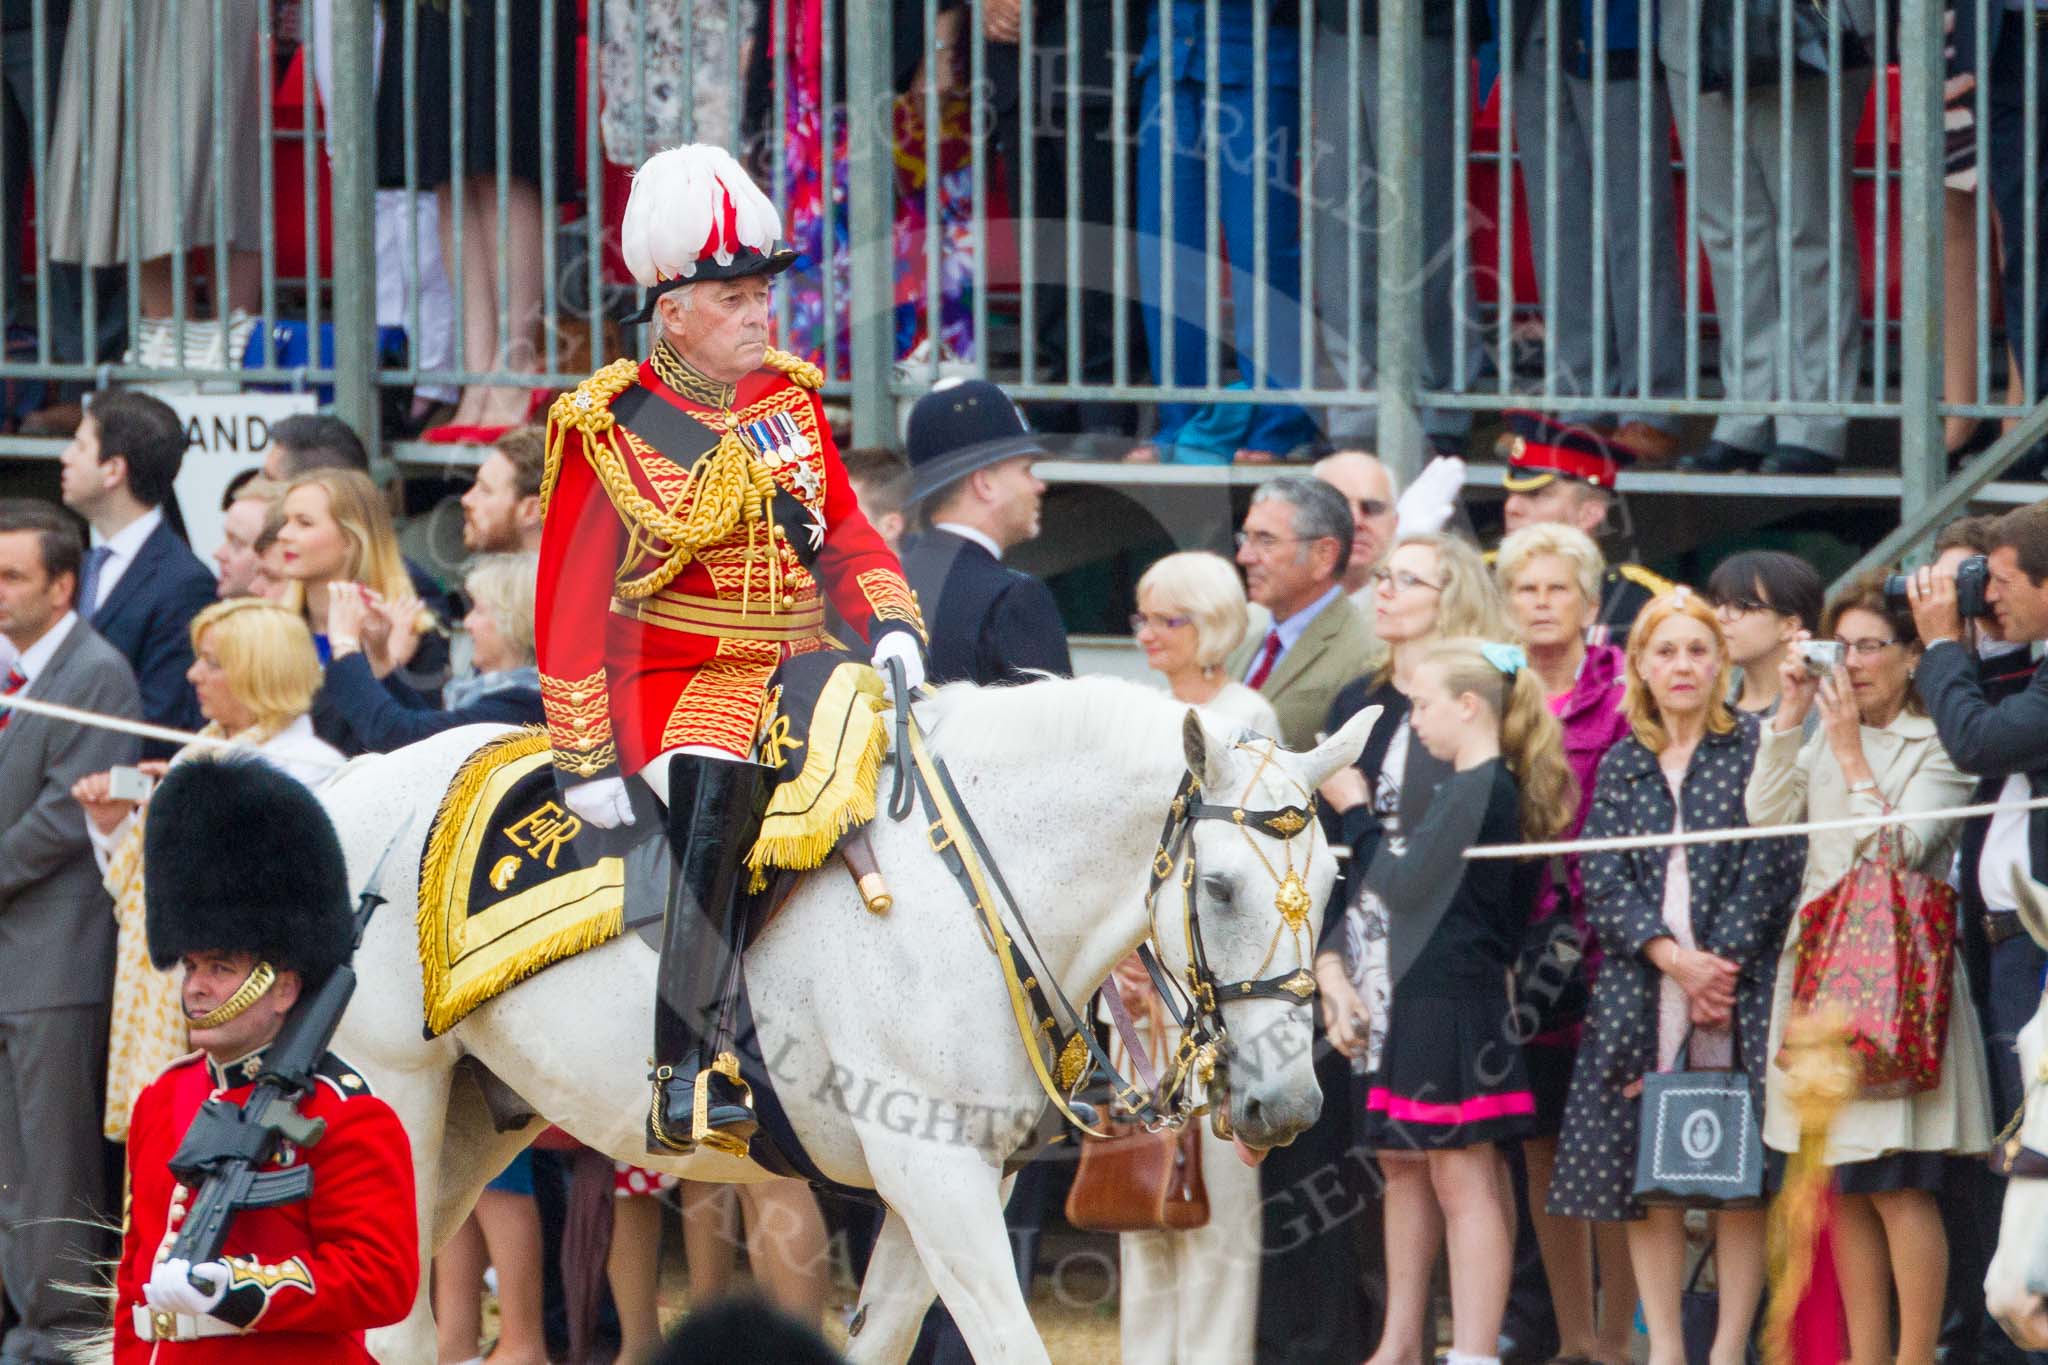 Trooping the Colour 2015. Image #242, 13 June 2015 10:58 Horse Guards Parade, London, UK